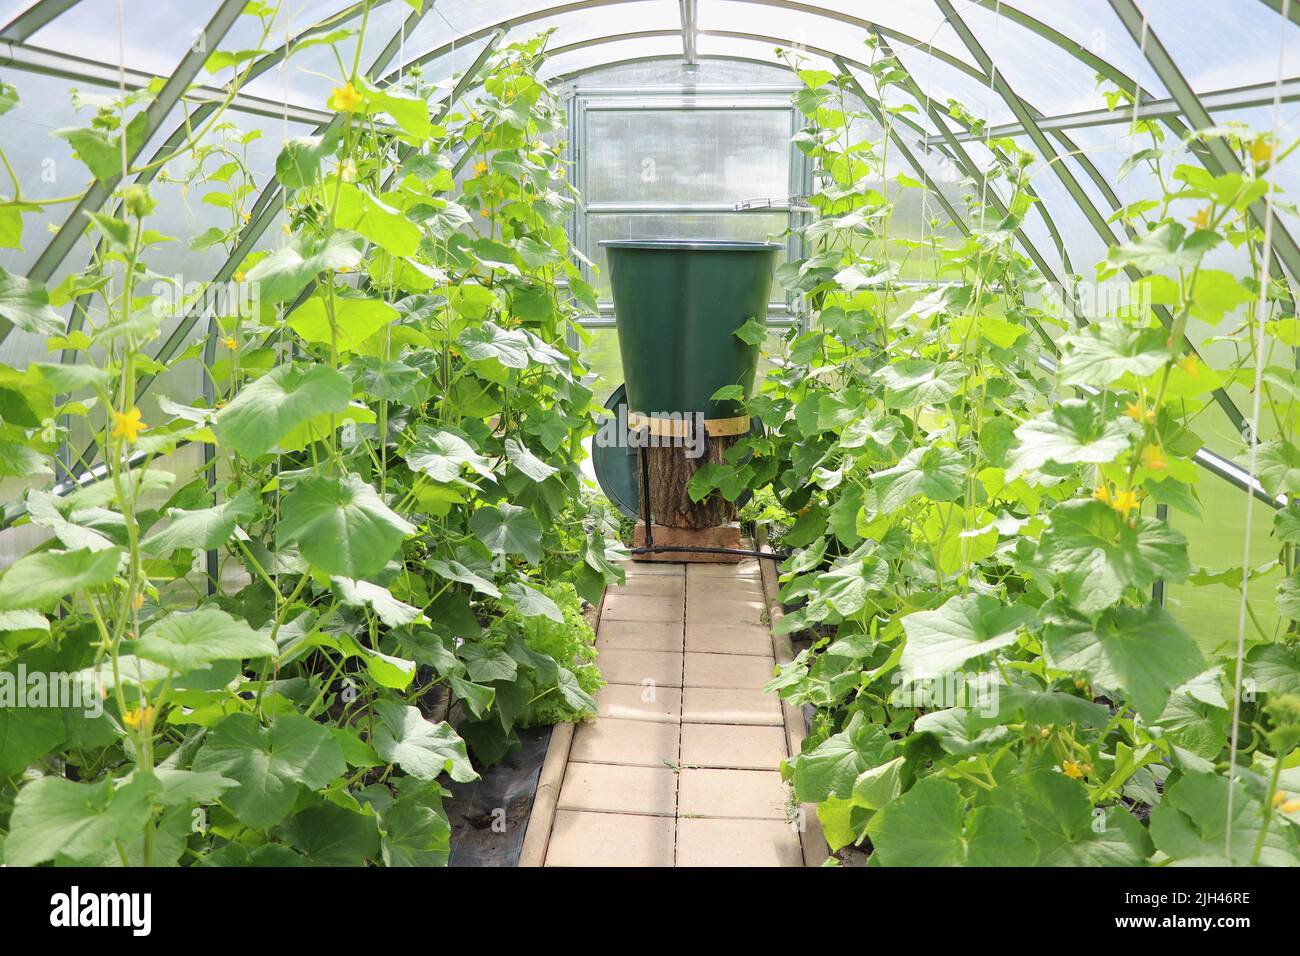 Cucumber plant growing in the greenhouse. Tied up plants Stock Photo